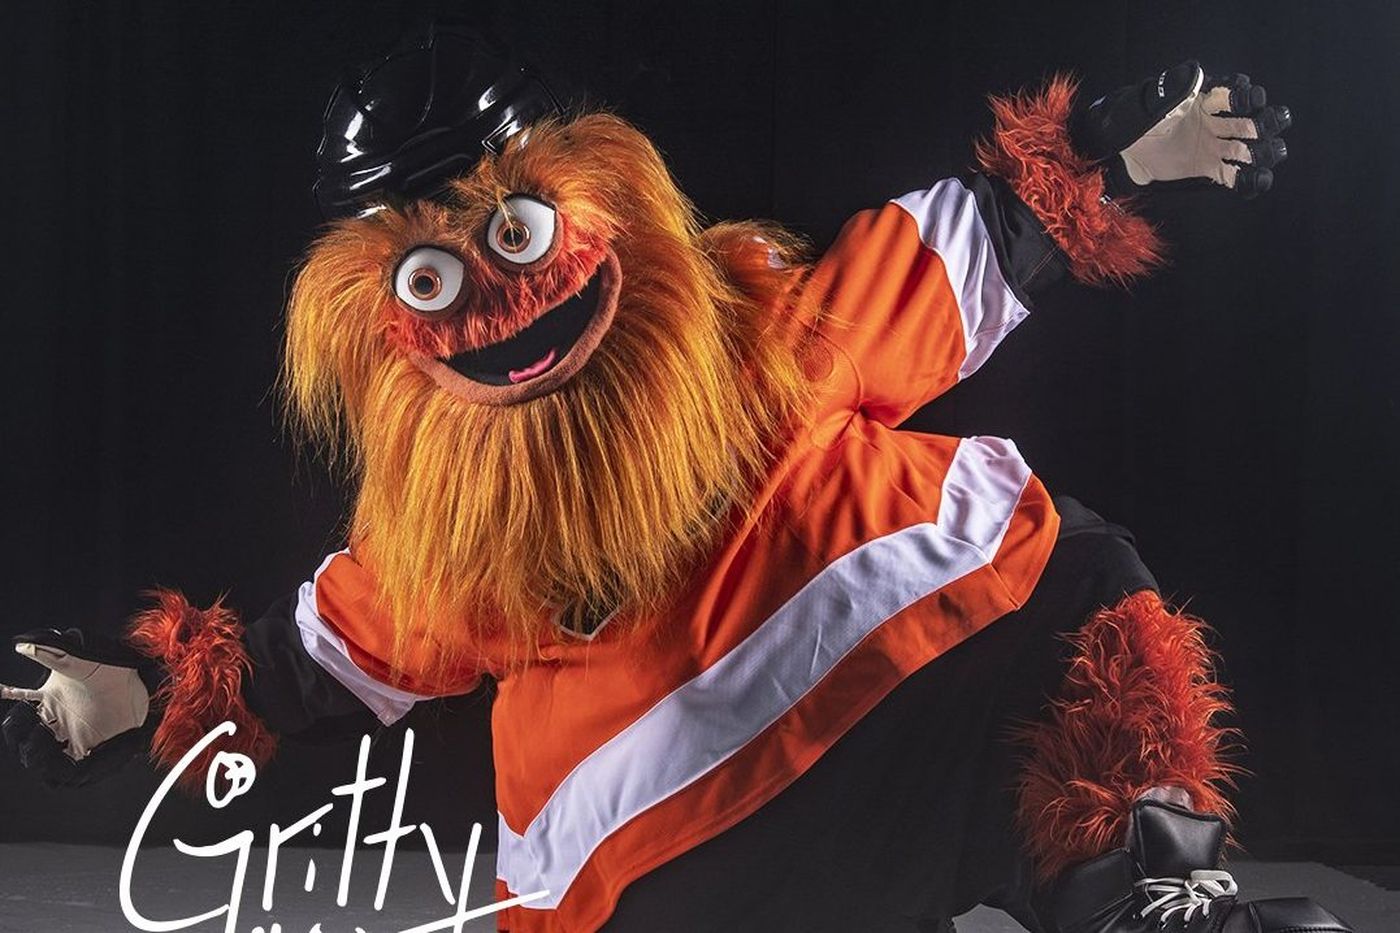 Gritty will Haunt your Dreams